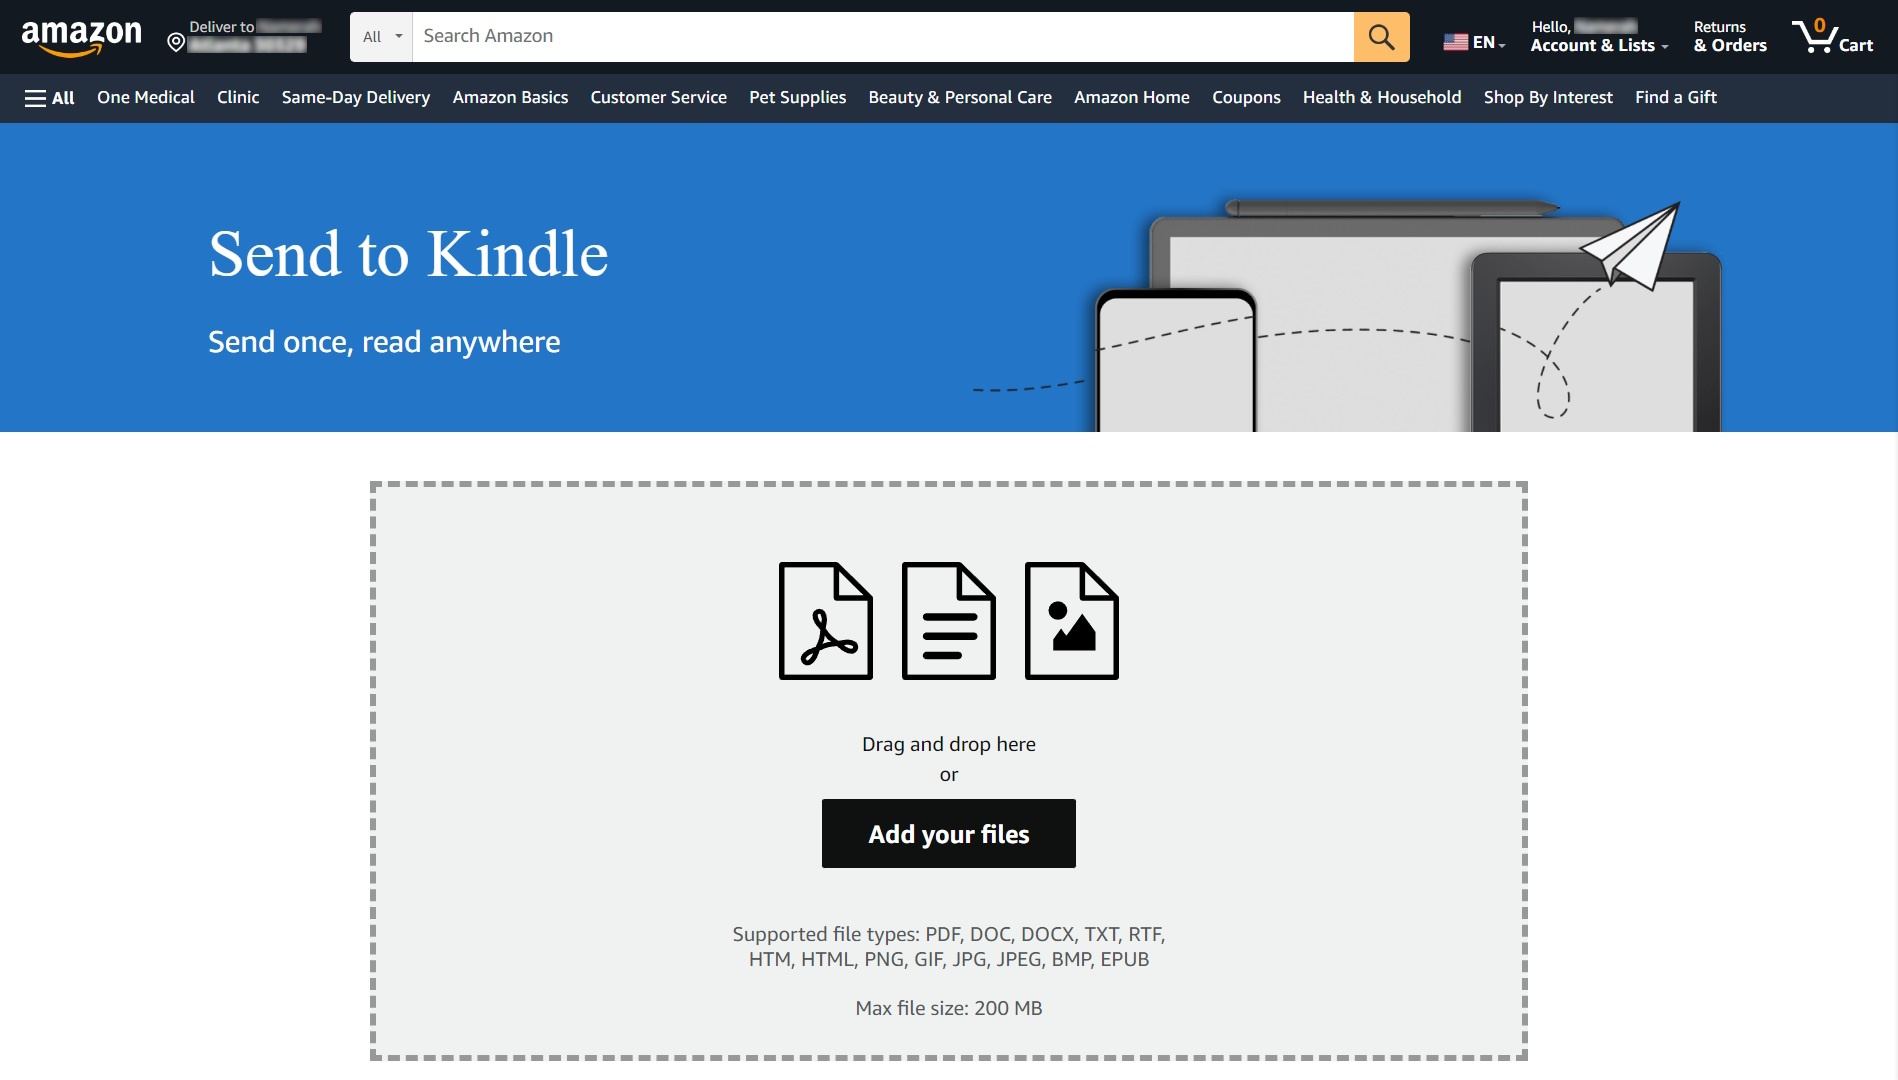 How to send files to your Amazon Kindle device on the web